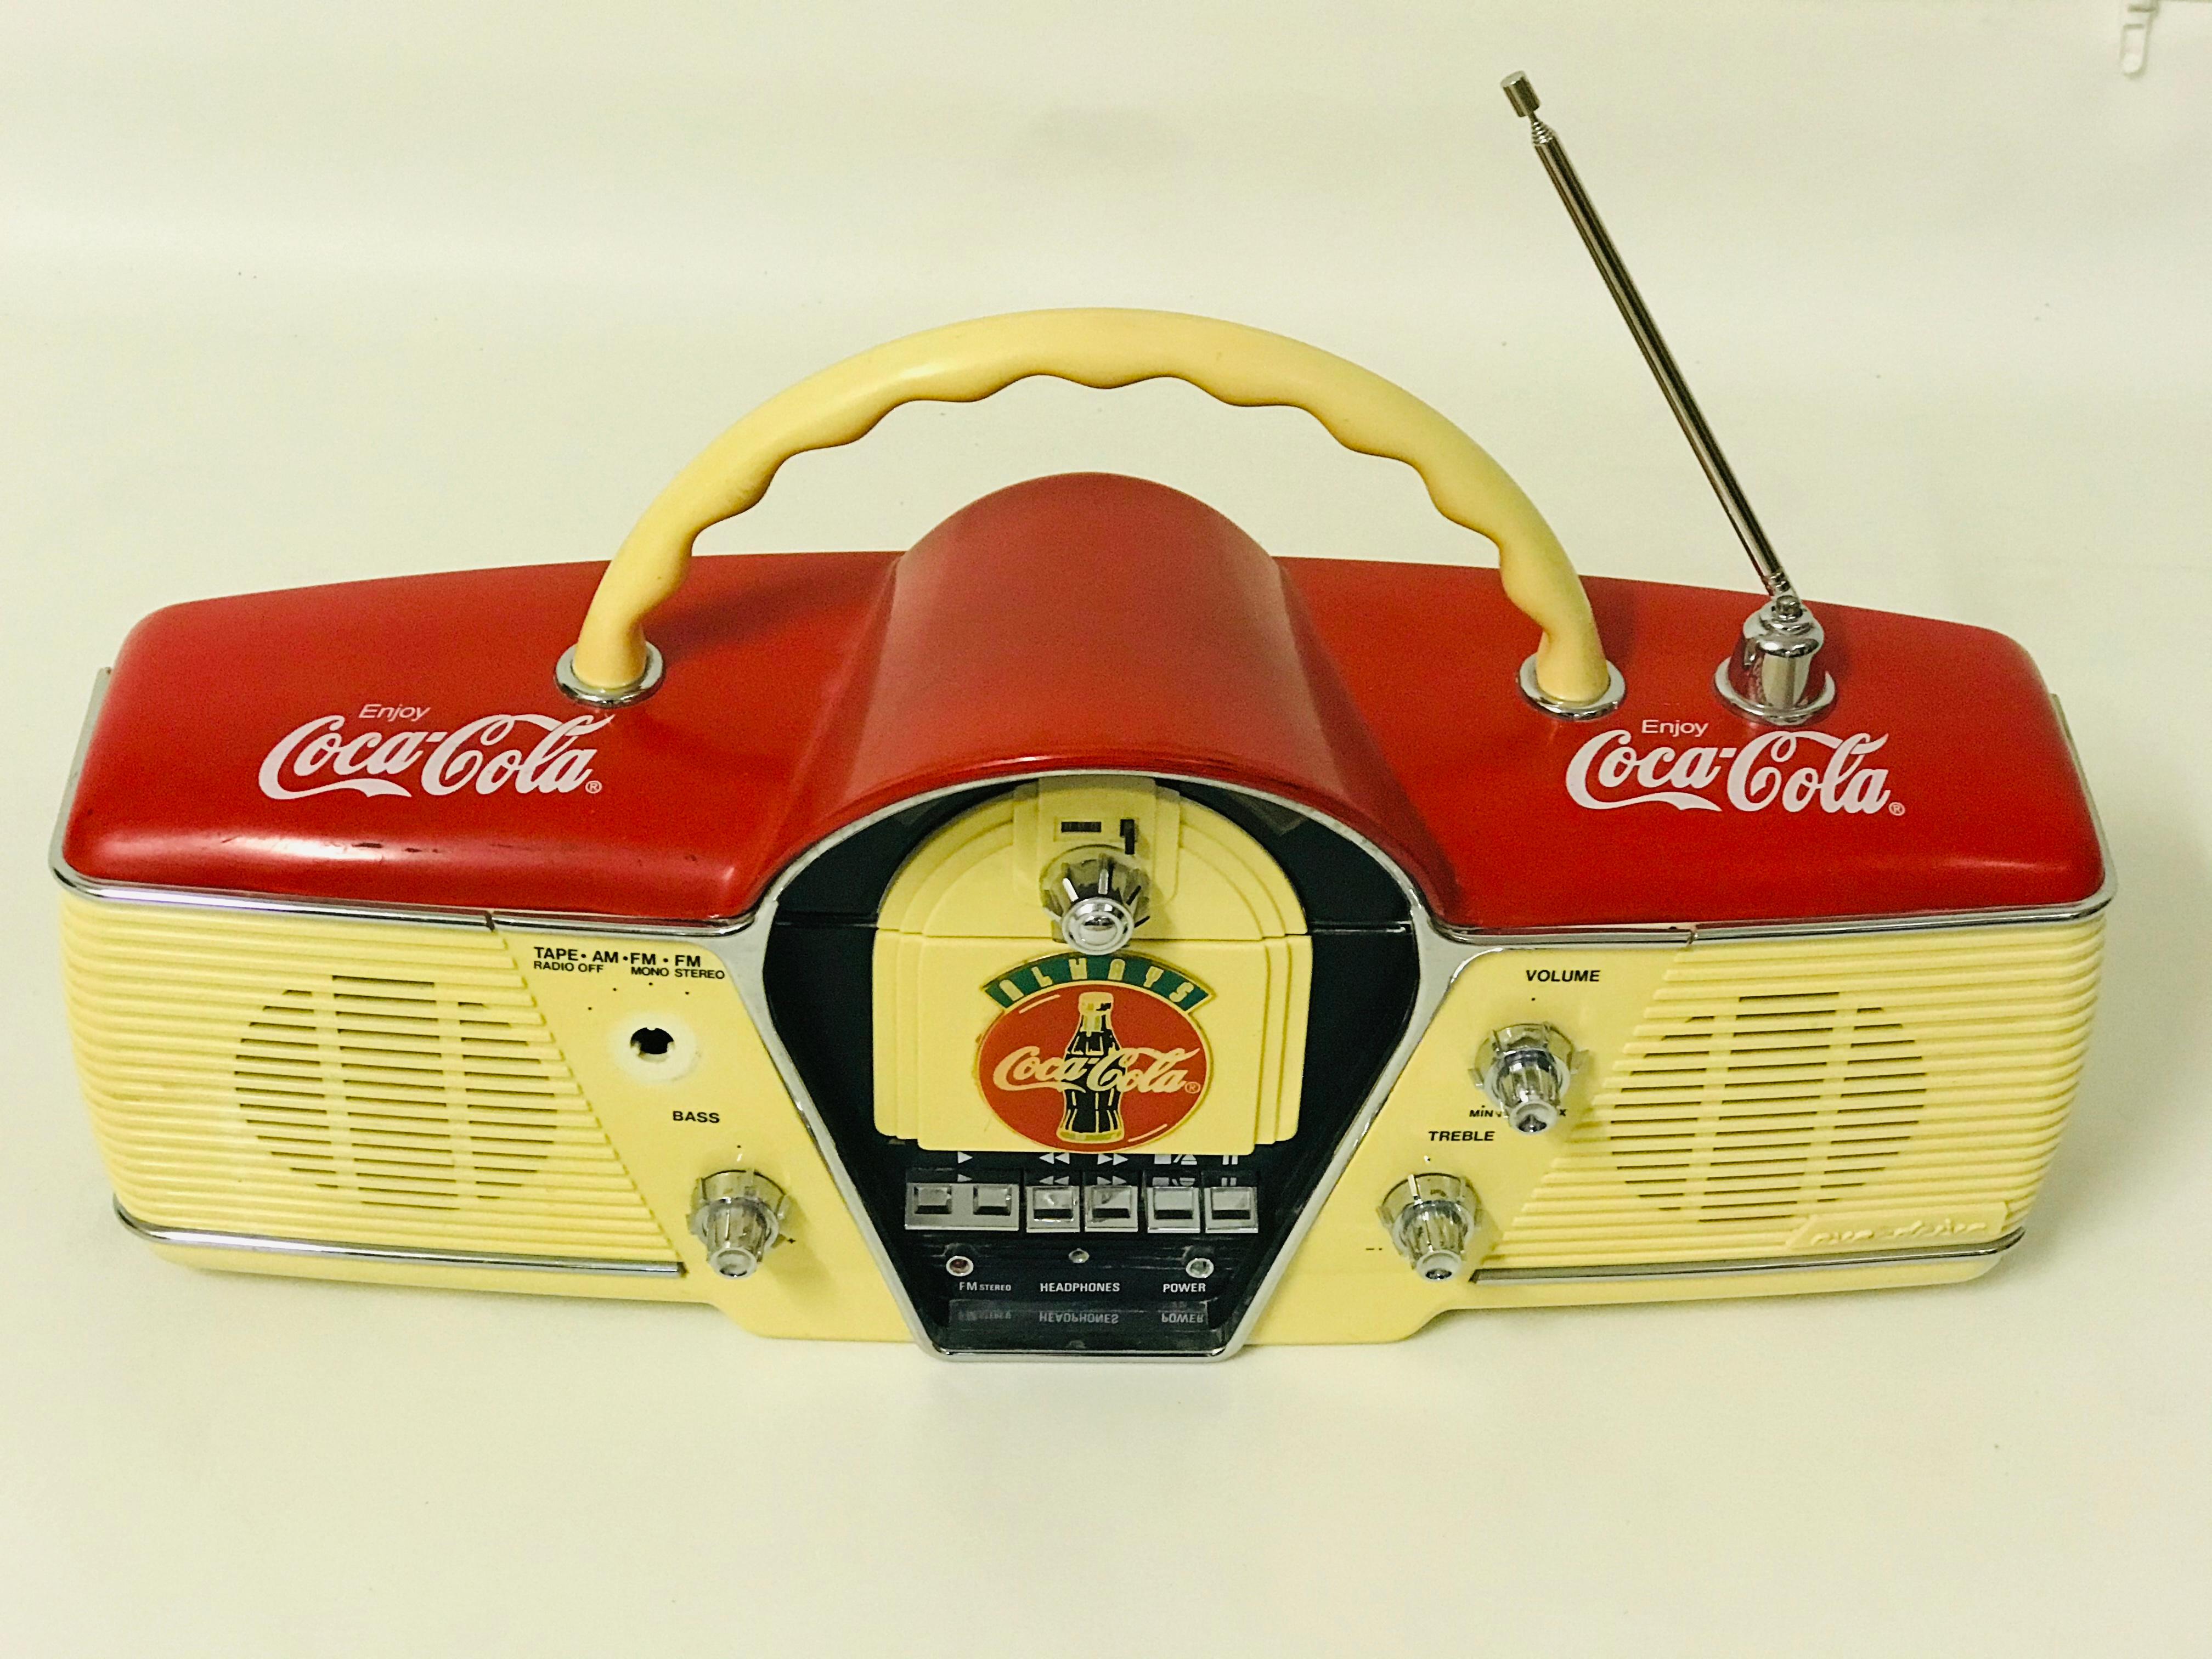 Stereo Radio Cassette Enjoy Coca Cola 1980 For Sale At 1stdibs Coca Cola Stereo